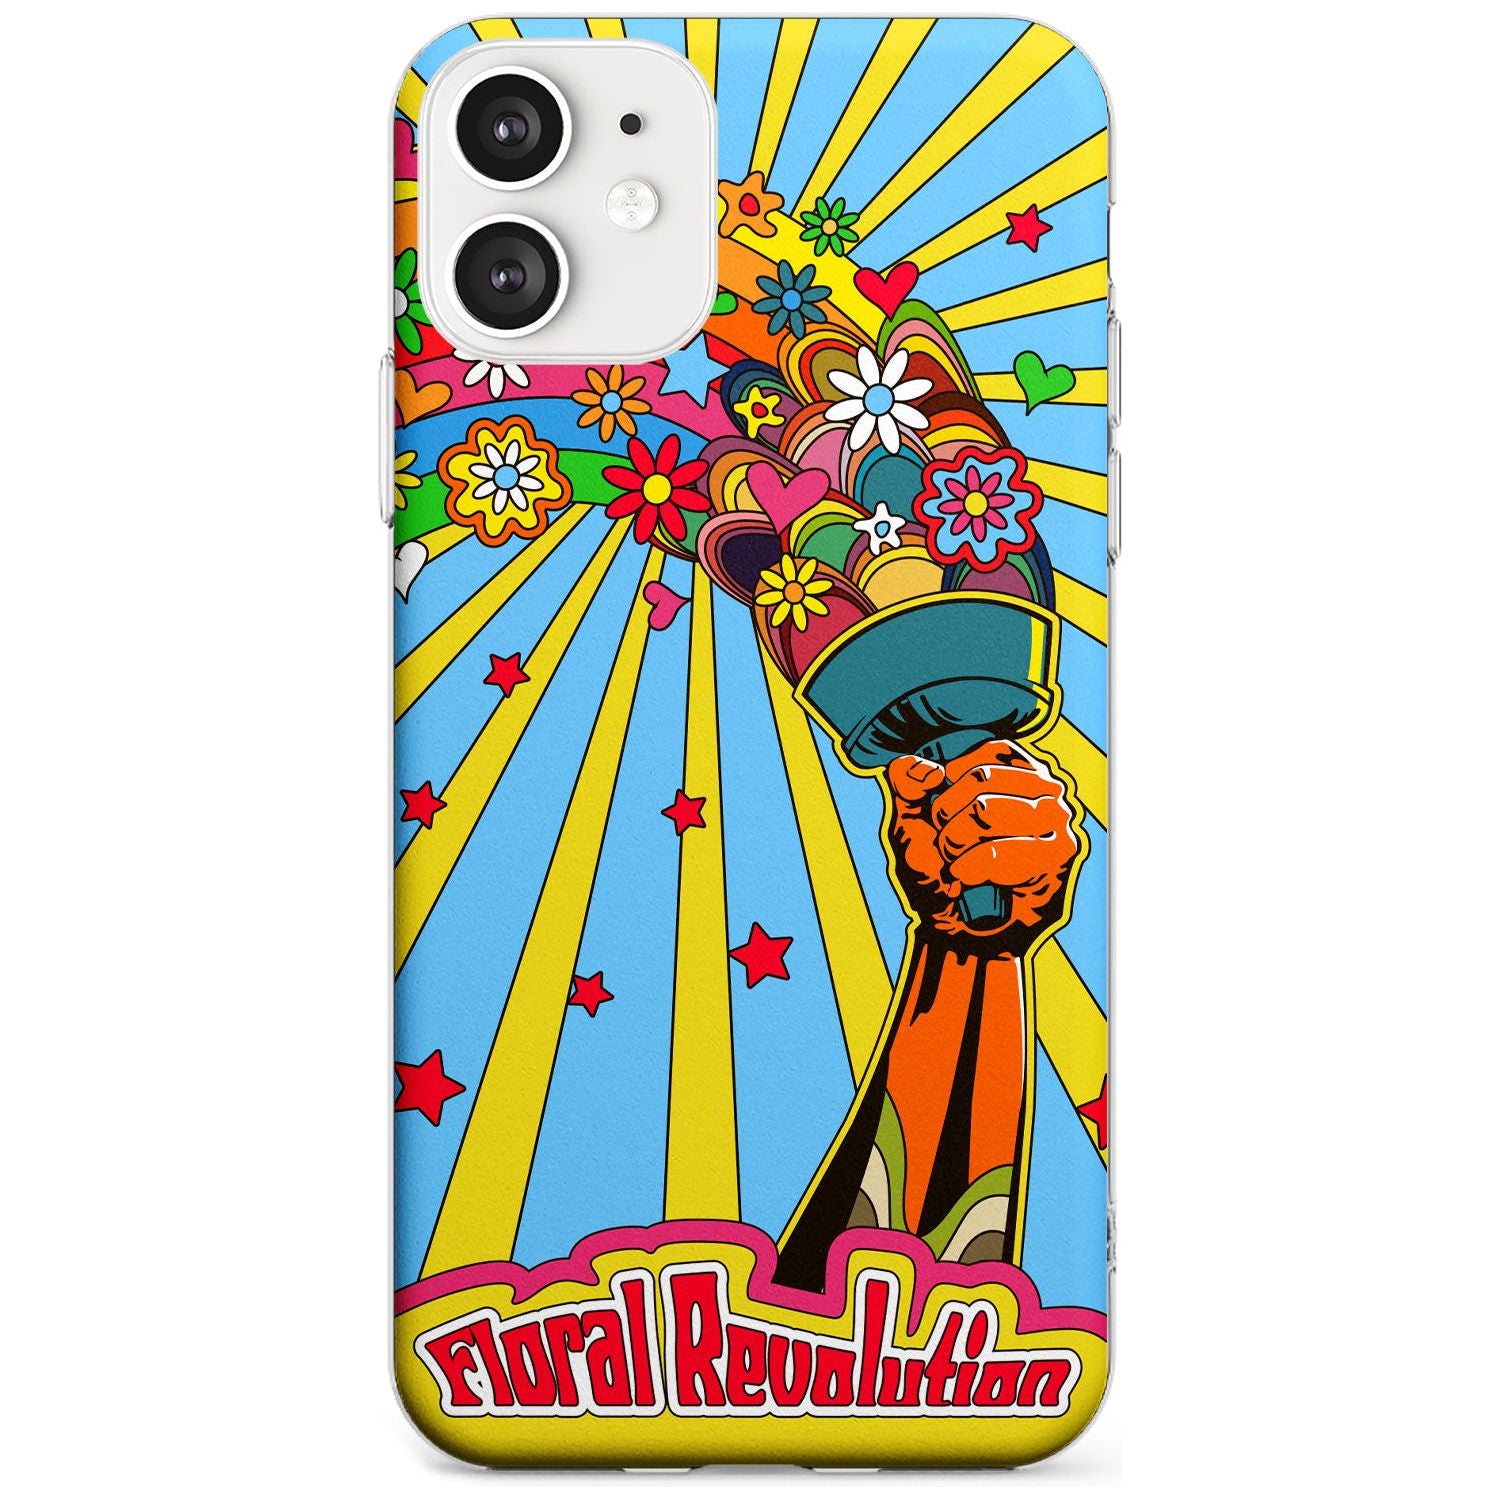 Floral Revolution Black Impact Phone Case for iPhone 11